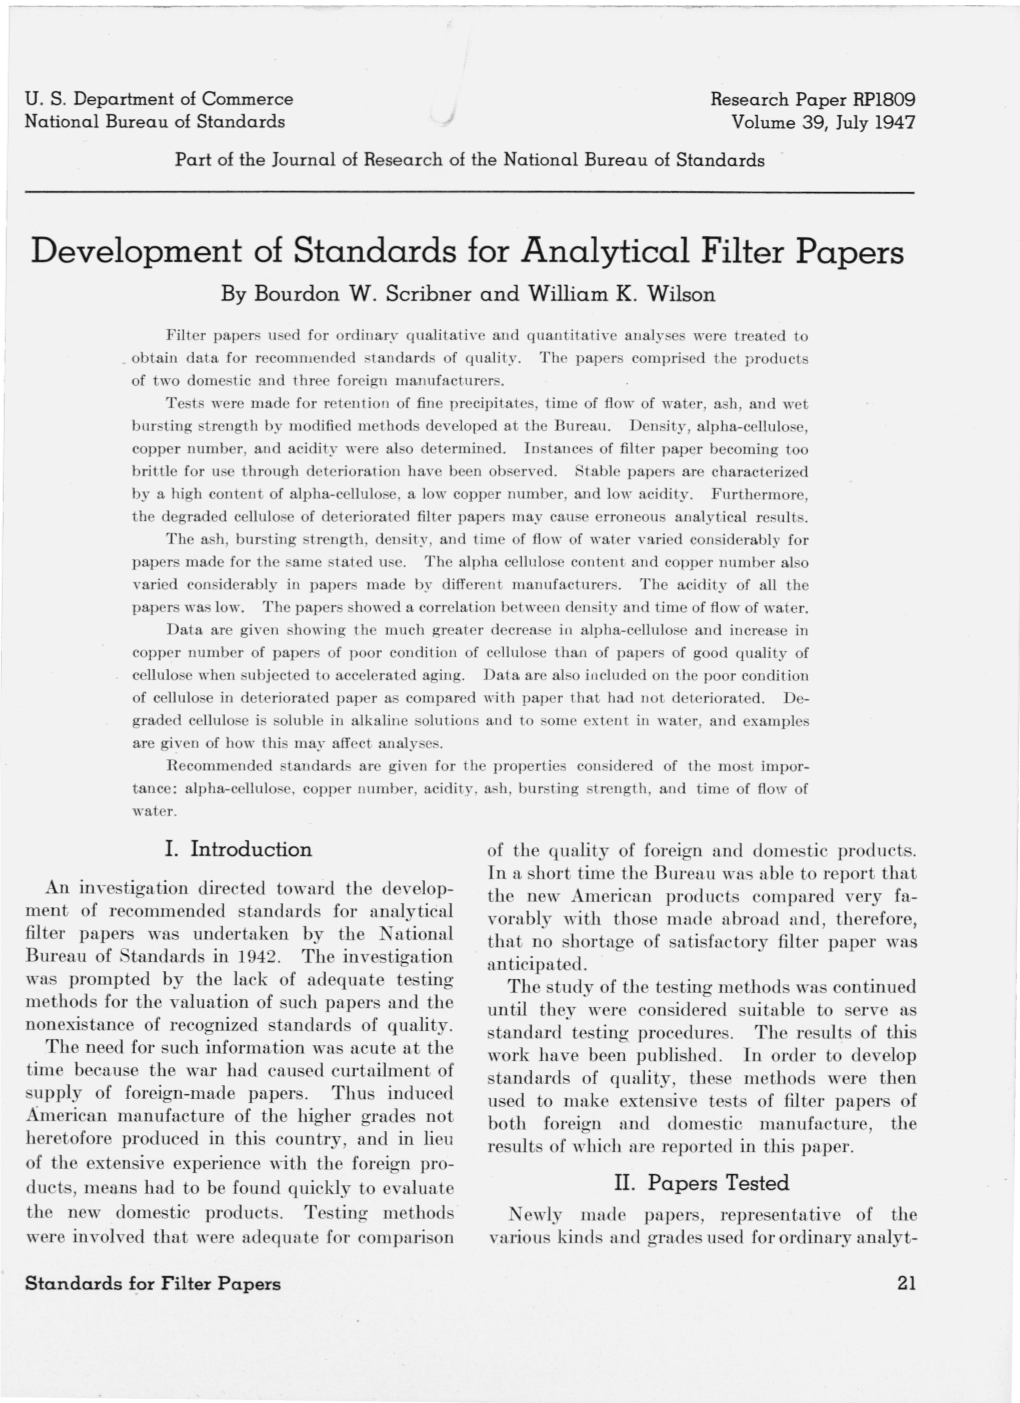 Development of Standards for Analytical Filter Papers by Bourdon W